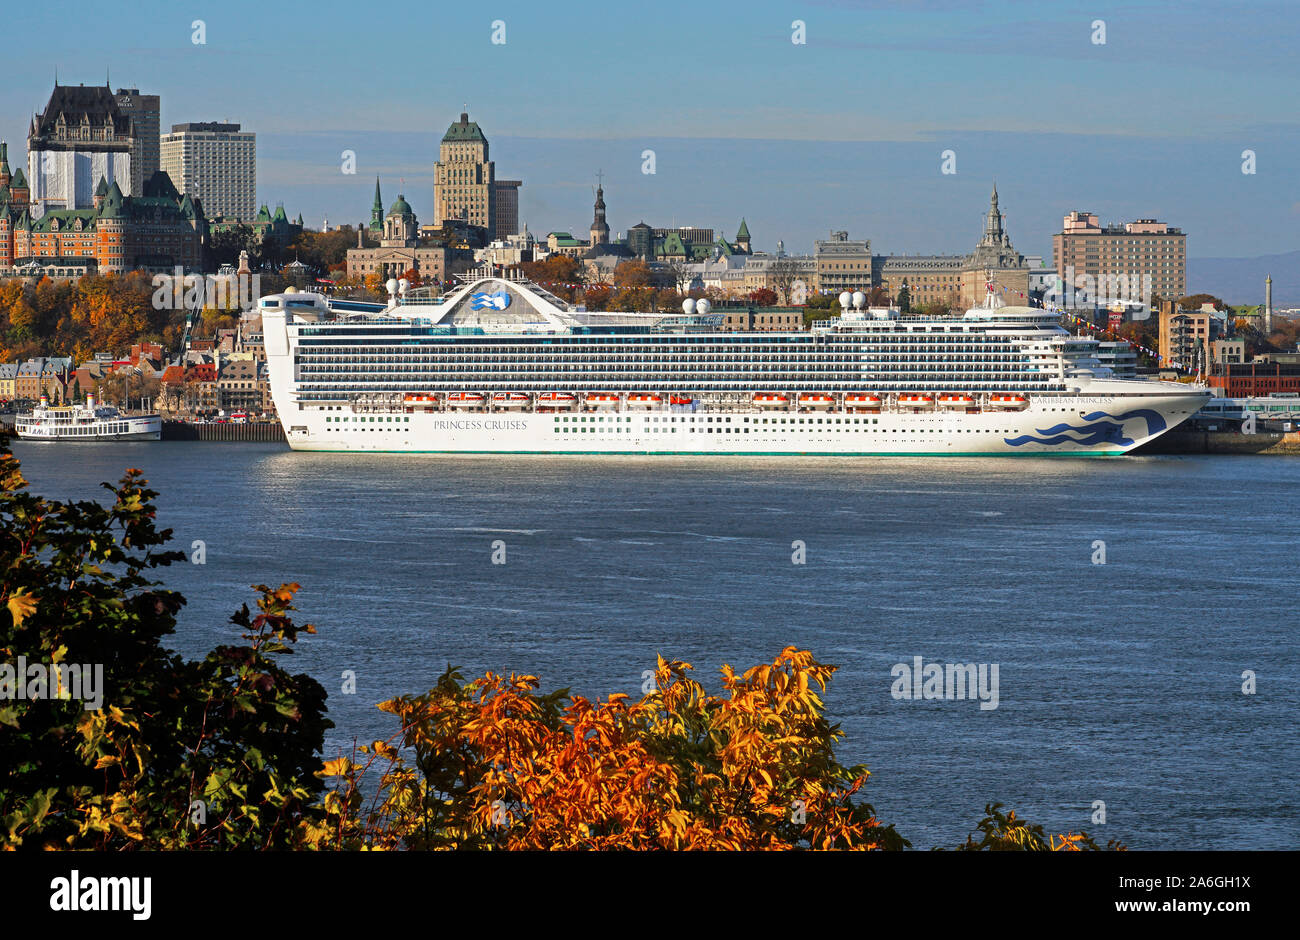 Caribbean Princess cruise ship docked on St. Lawrence River at Quebec City on autumn cruise of French Canada Stock Photo